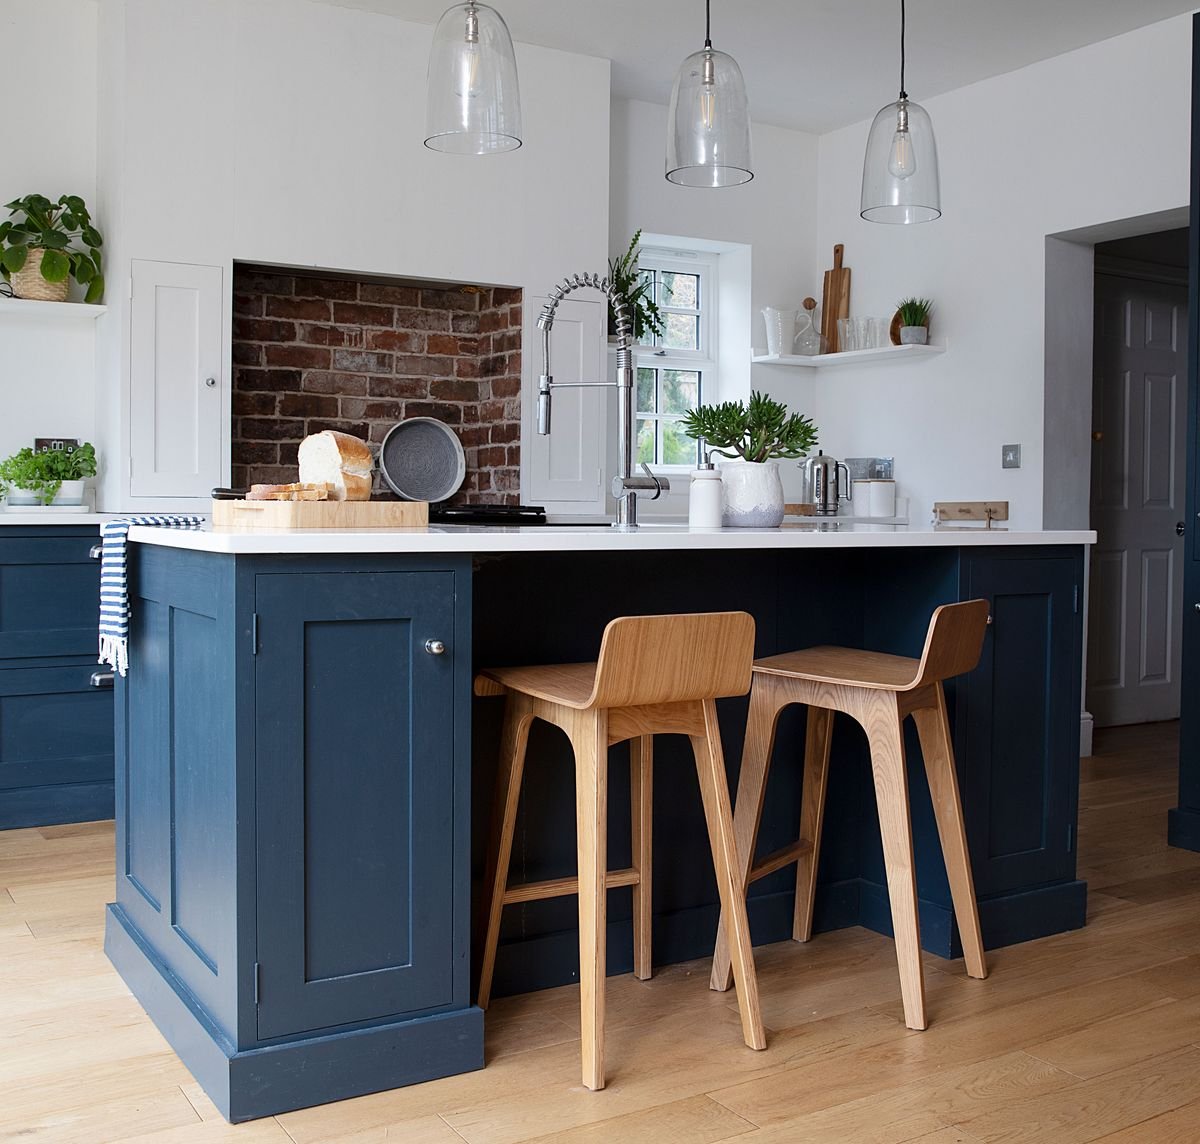 Real home: A converted mill house becomes a charming home for a young family